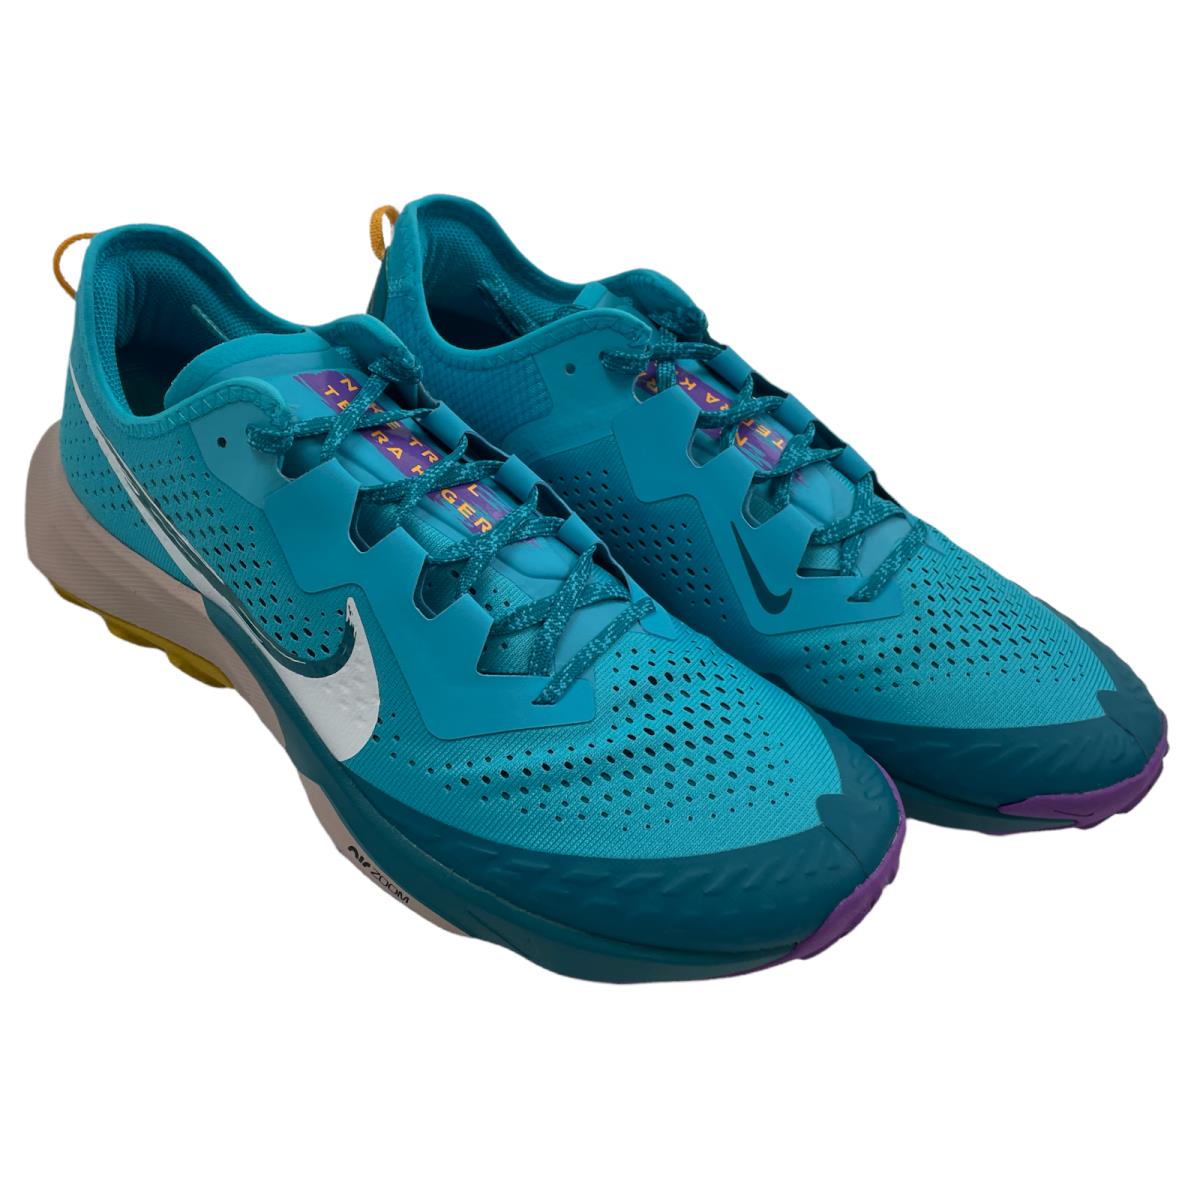 Nike Men`s Air Zoom Terra Kiger 7 Shoes CW6062 400 Turquoise Blue Size 12 - Blue